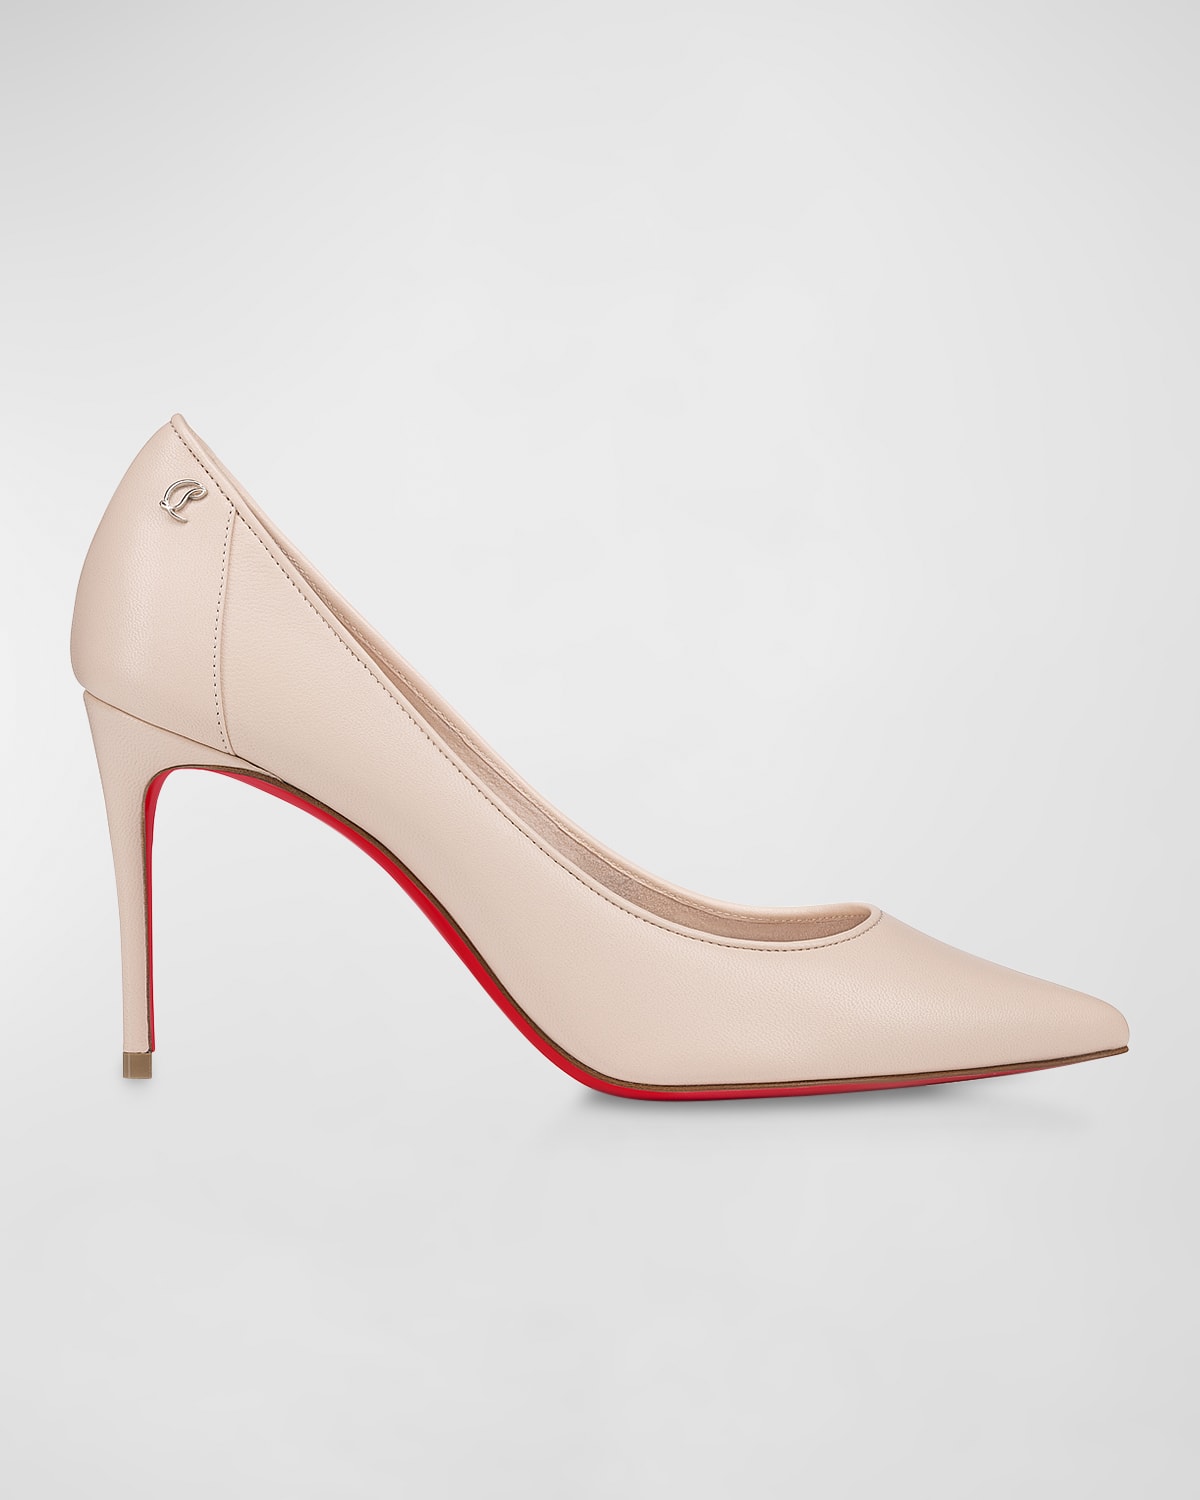 Shop Christian Louboutin Sporty Kate Napa Red Sole Pumps In Leche